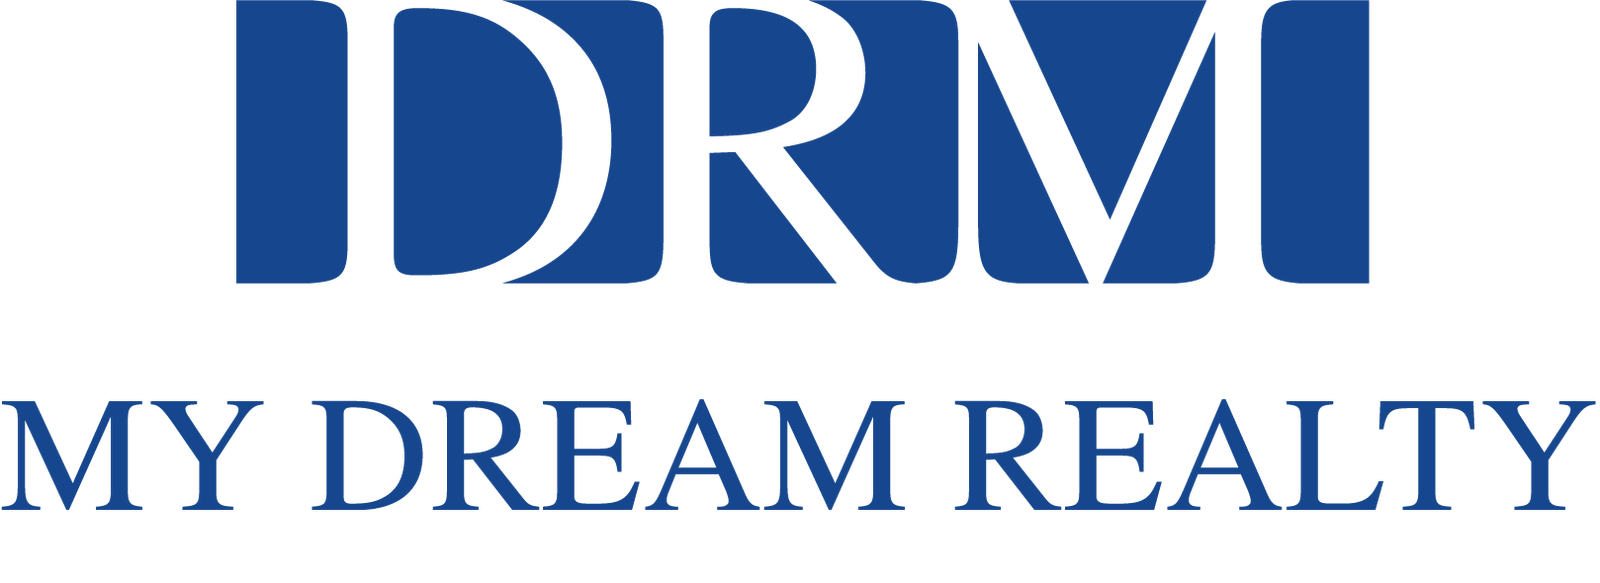 My Dream Realty | Vancouver Property Management & Sales